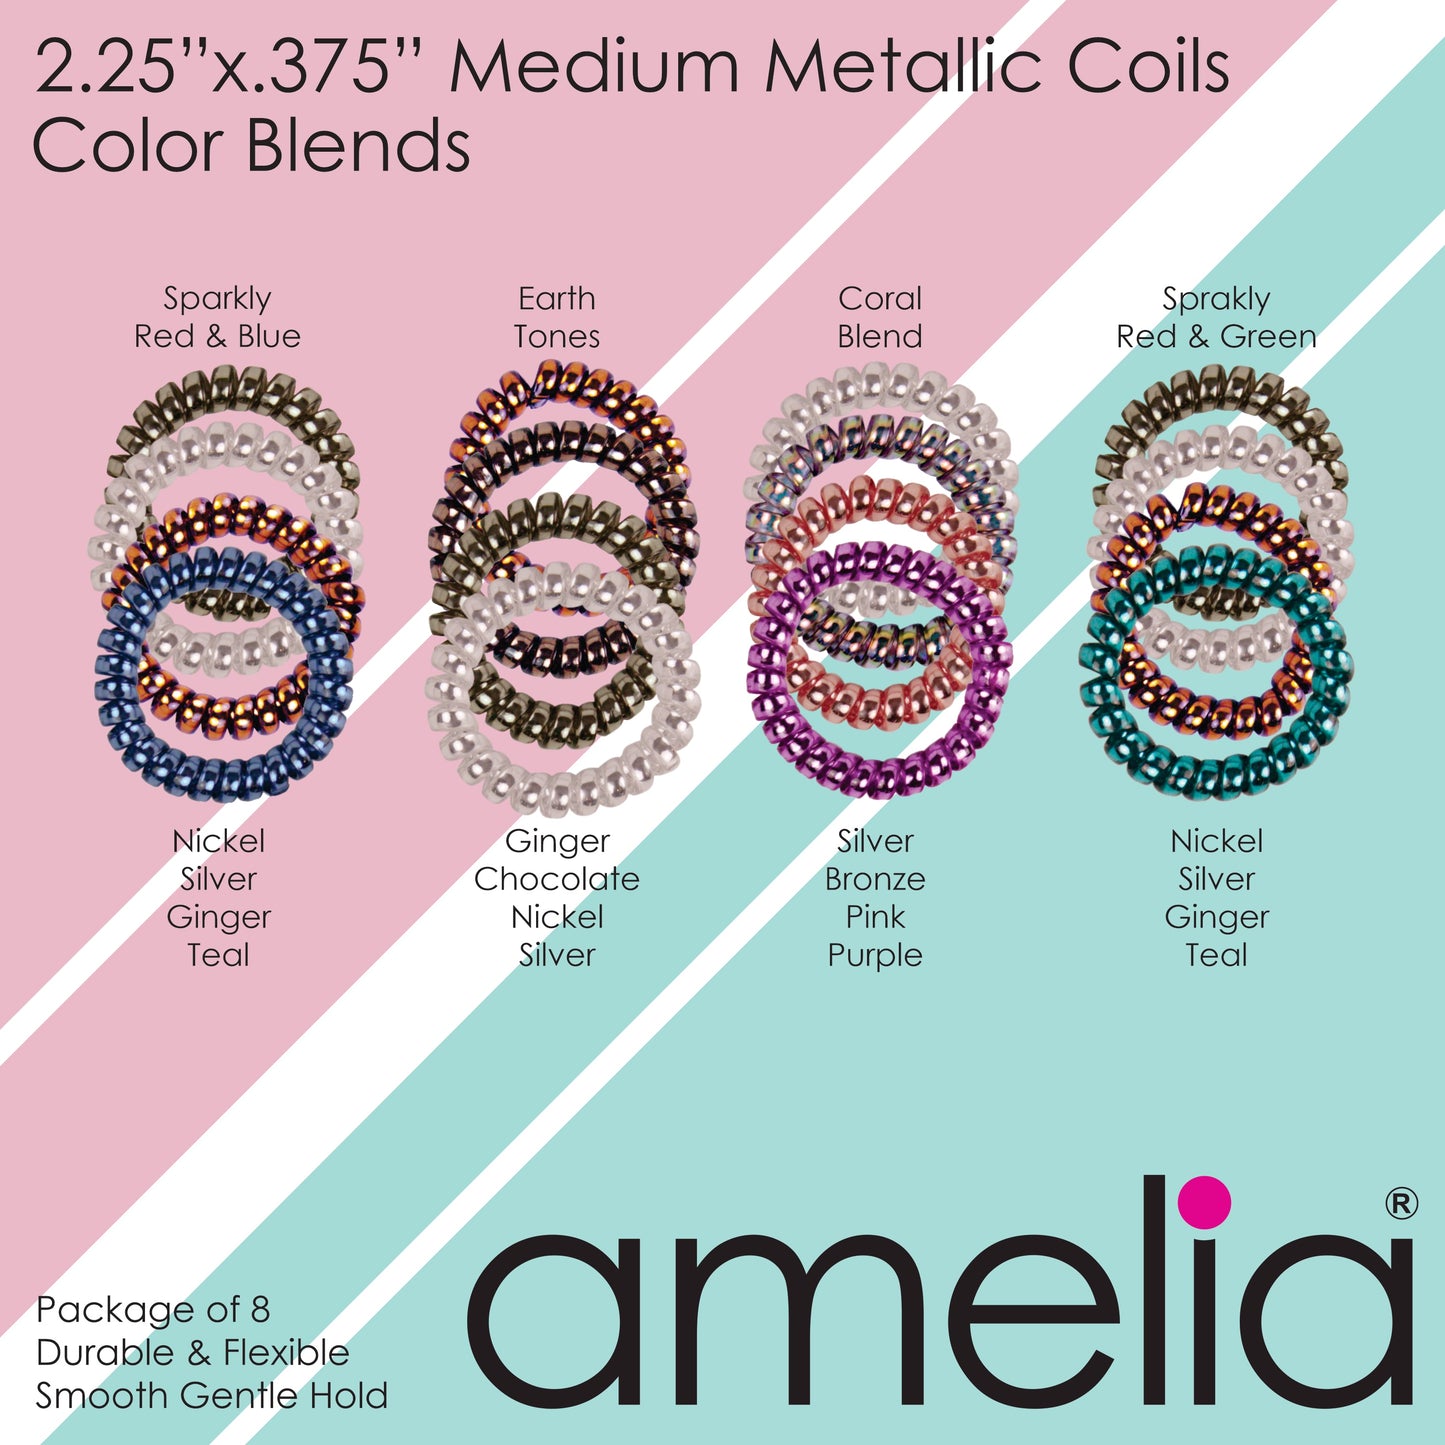 Amelia Beauty Products 8 Medium Smooth Elastic Hair Coils, 2.25in Diameter Spiral Hair Ties, Gentle on Hair, Strong Hold and Minimizes Dents and Creases, Coral Blend